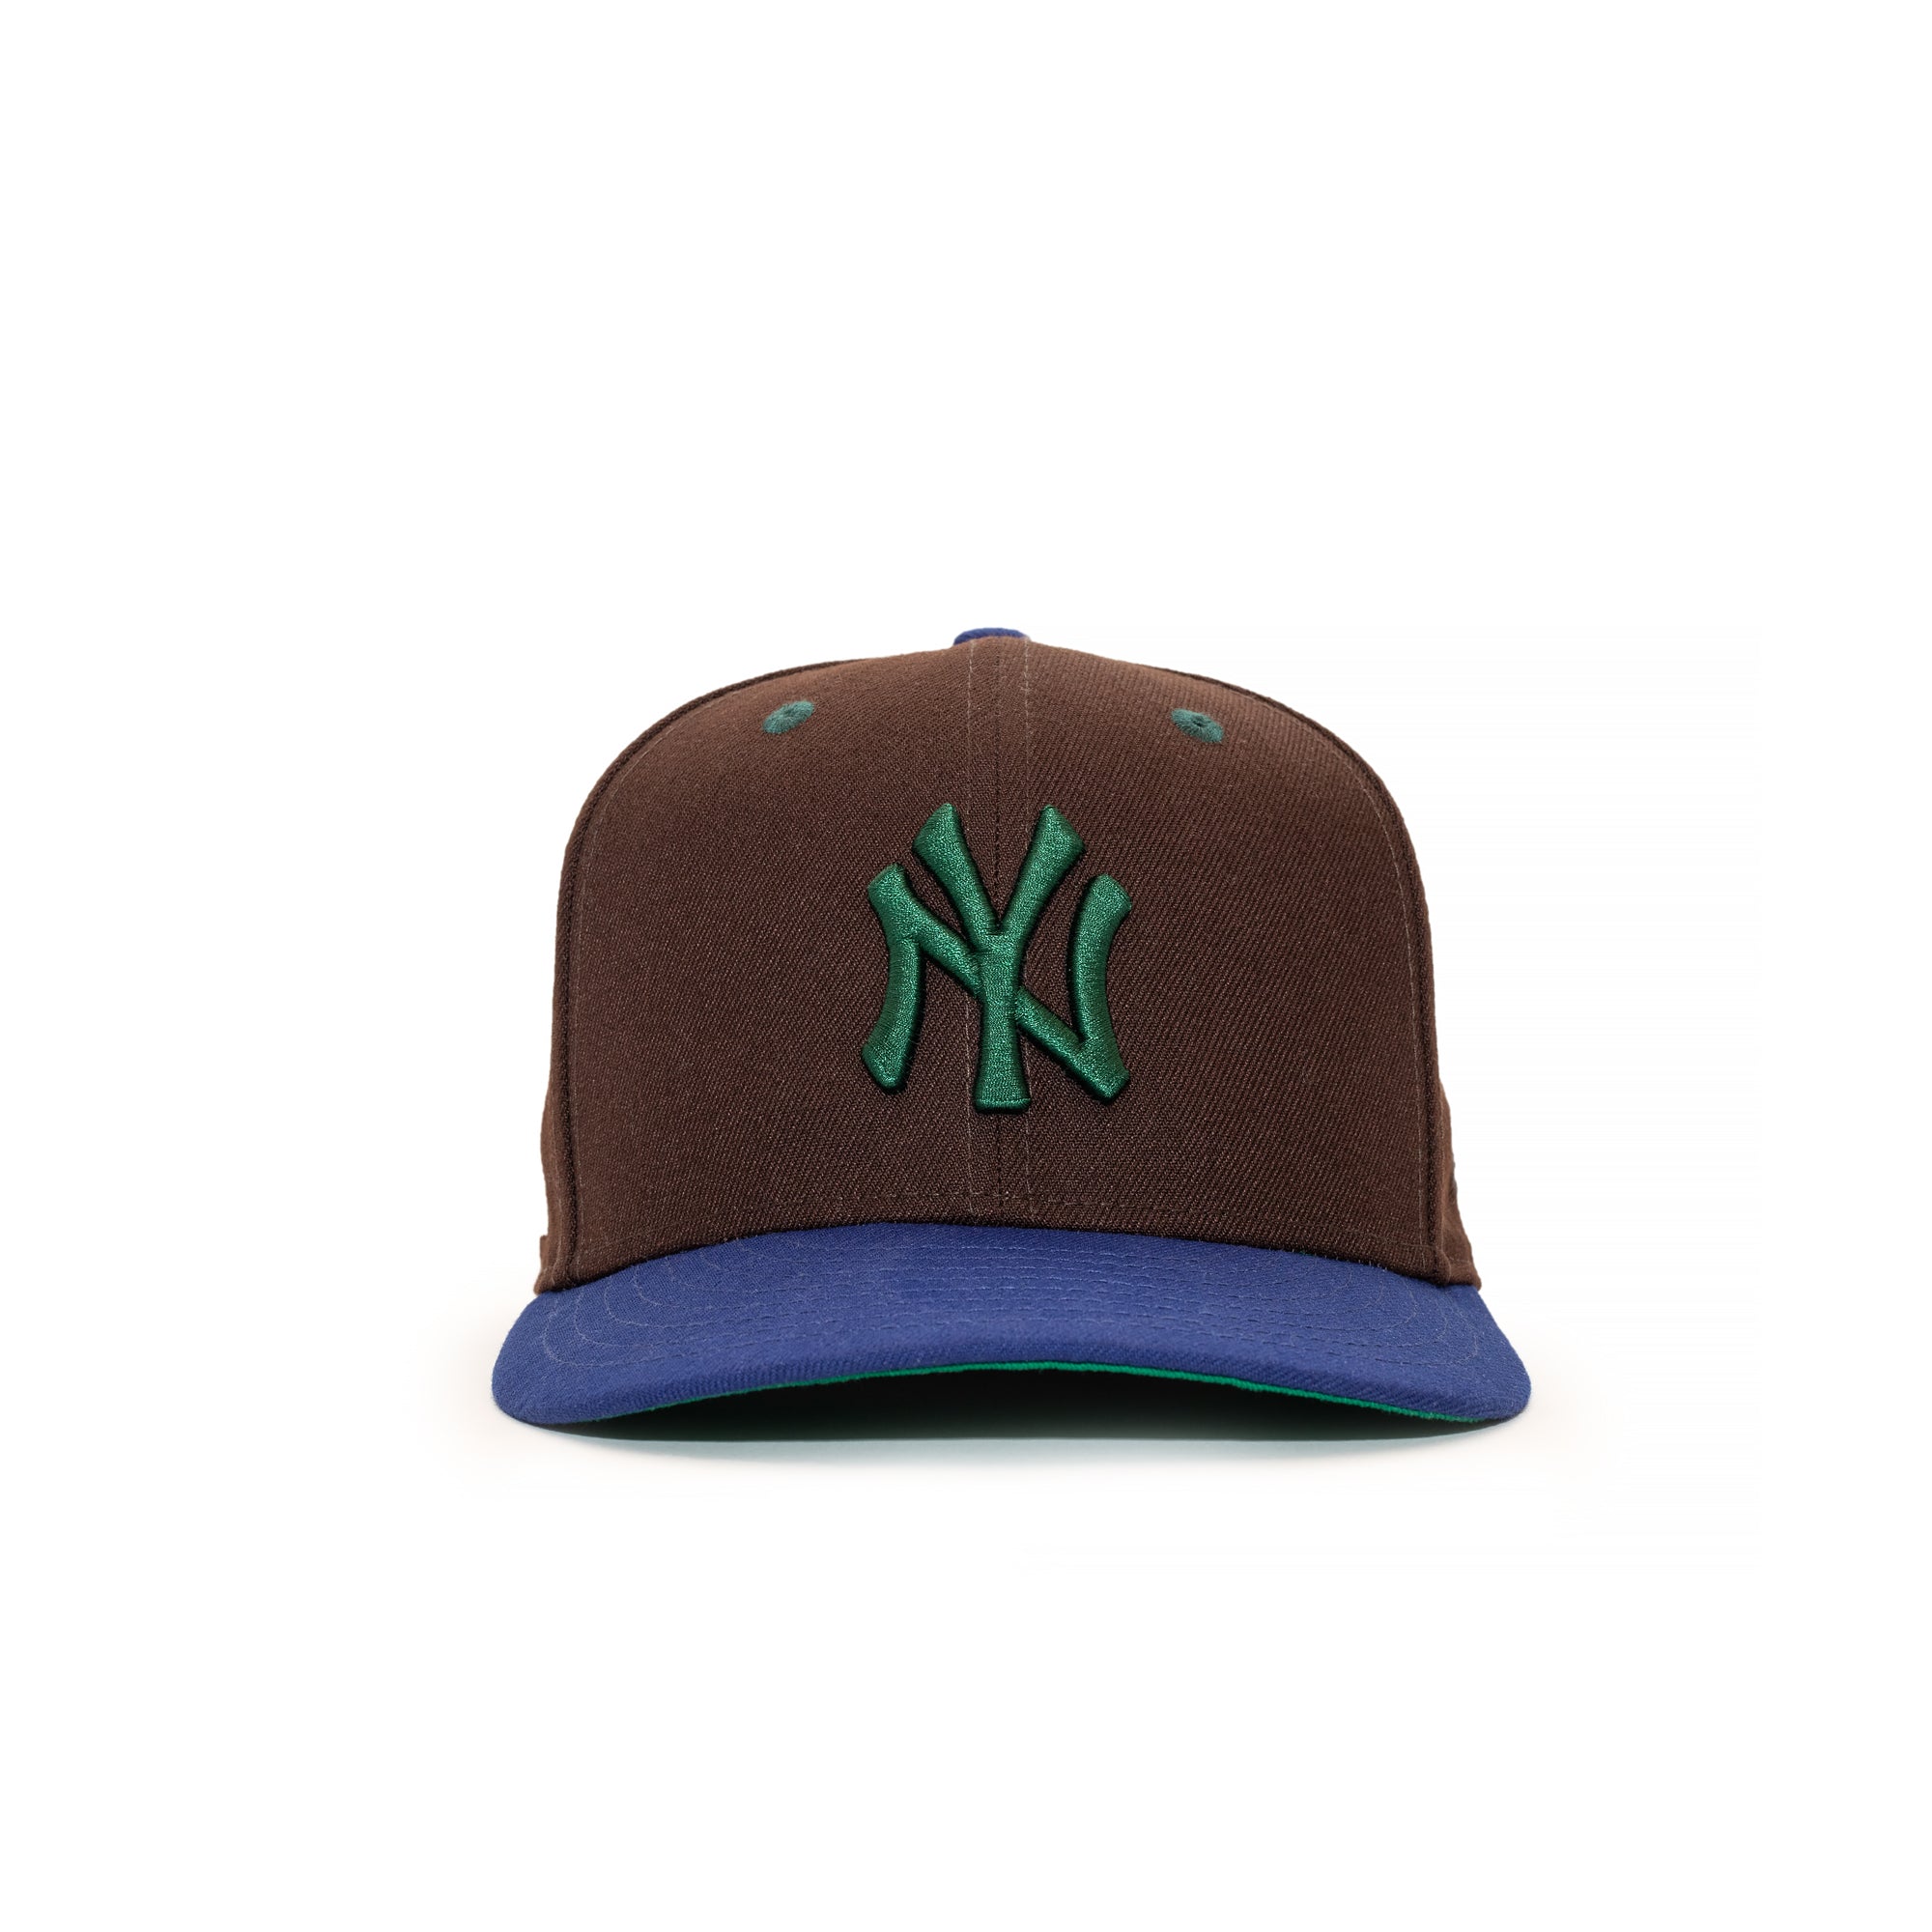 New Era Side Patch 9FIFTY New York Yankees Men Caps Brown in Size:S/M